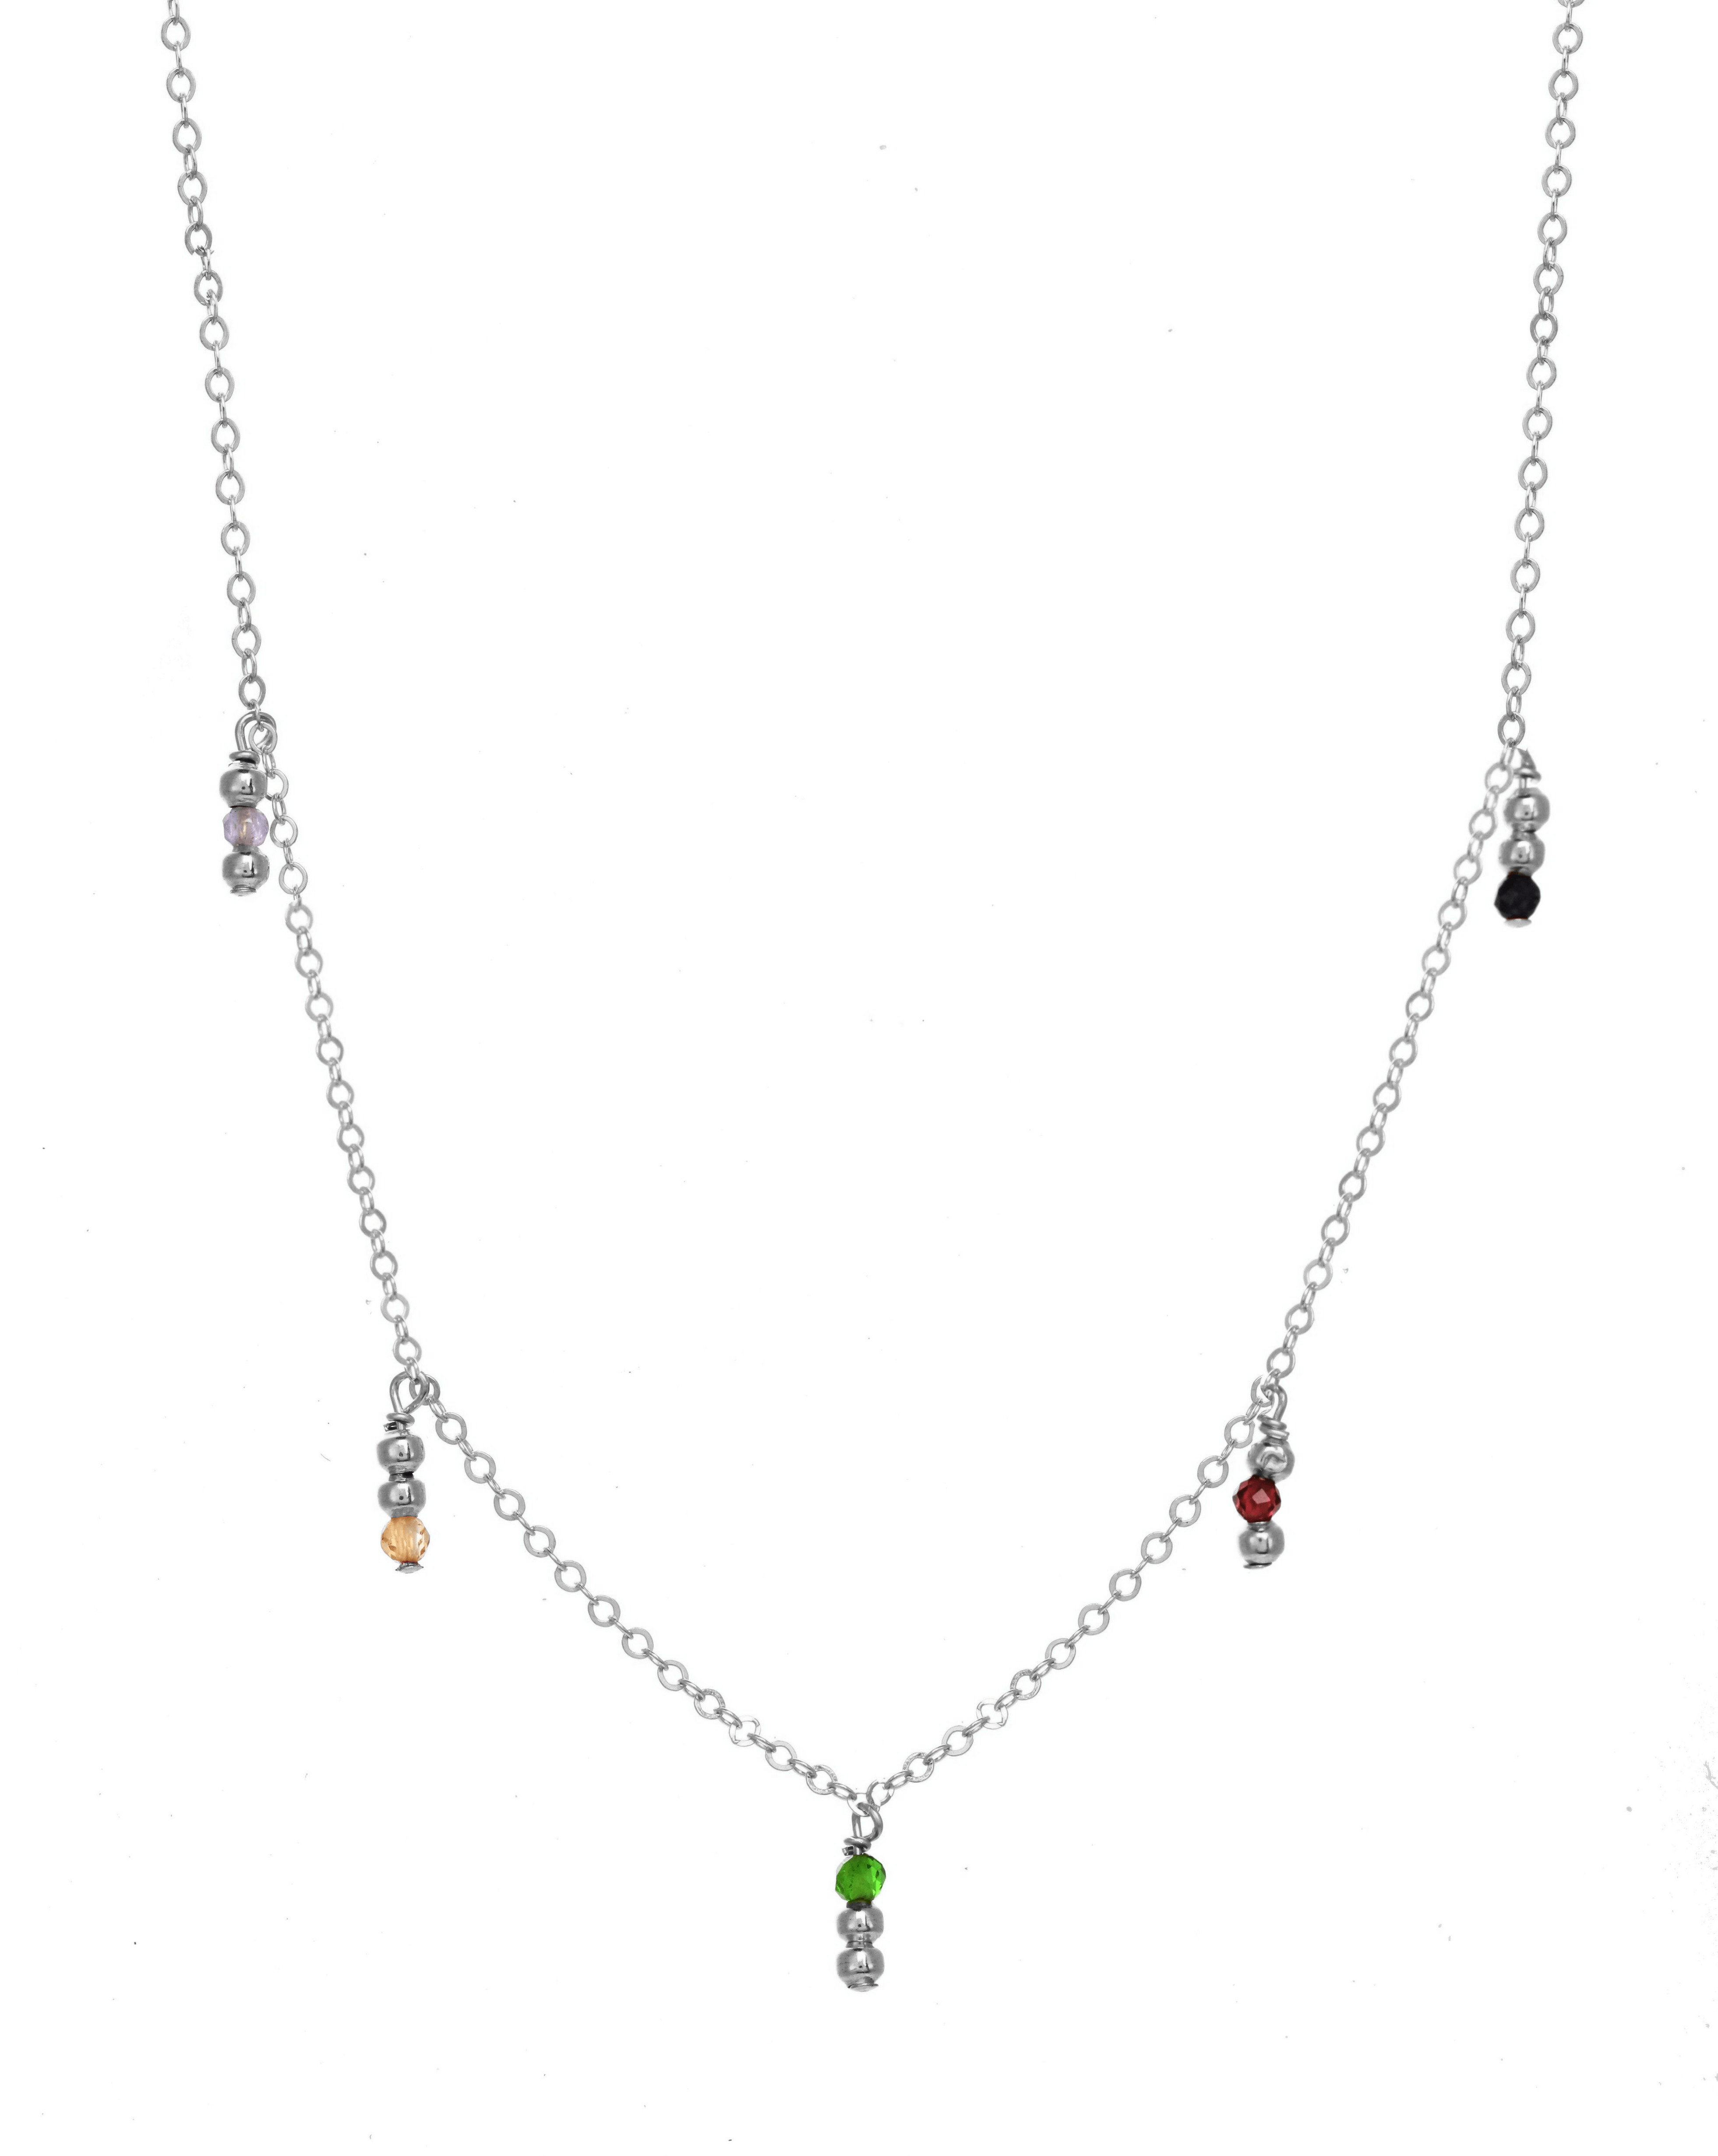 Saga Necklace by KOZAKH. A 16 to 18 inch adjustable length necklace, crafted in Sterling Silver, featuring 2mm Seamless round beads and 2mm Faceted round Emerald, Garnet, Sapphire, Tanzanite and Topaz.